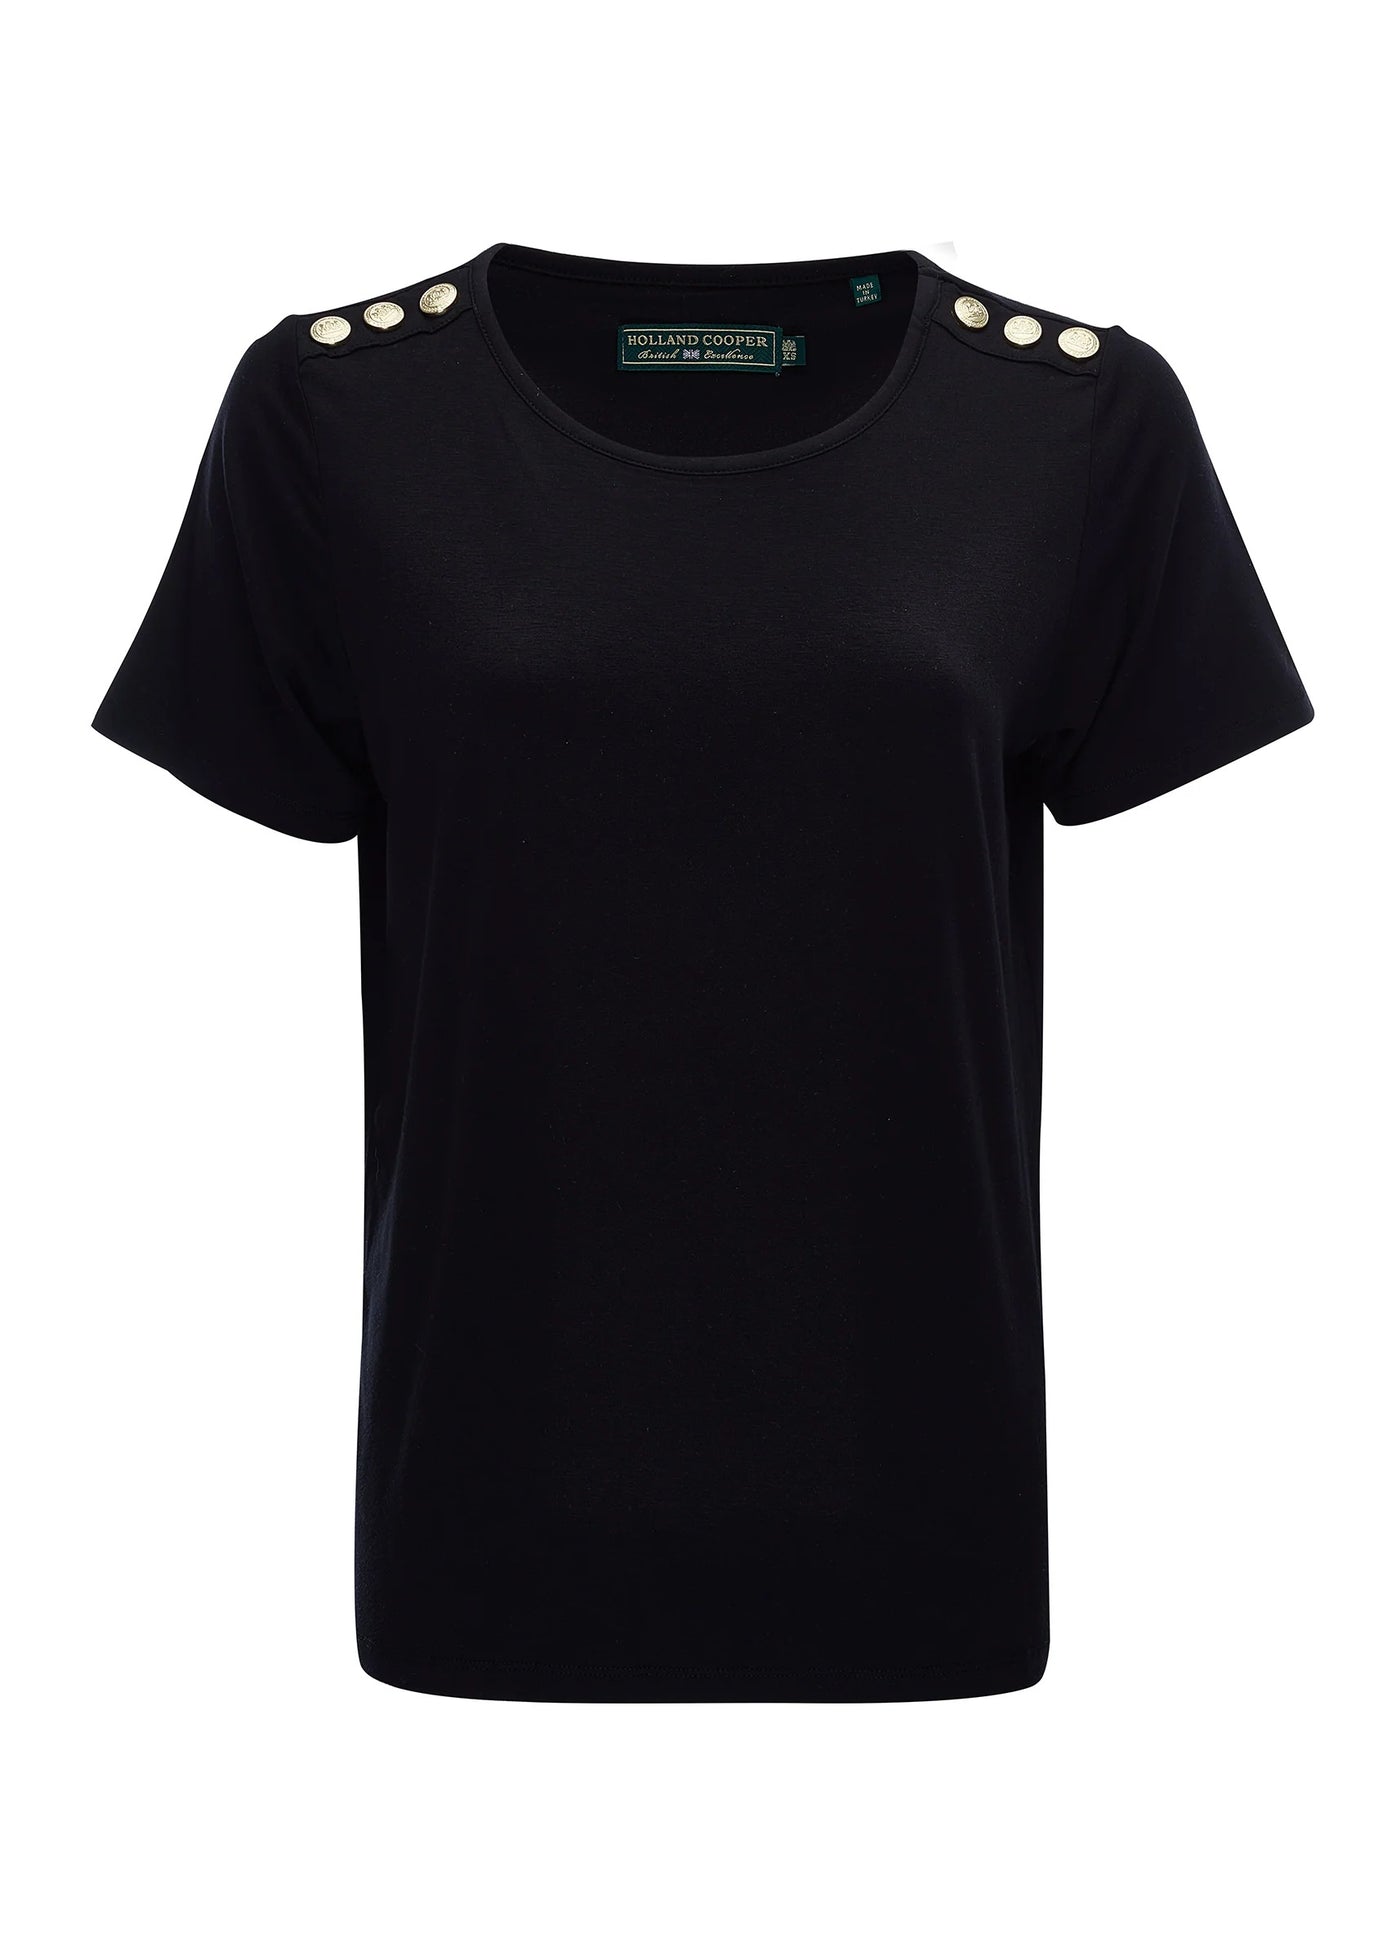 Holland Cooper Relax Fit Crew Neck Tee in Black Front